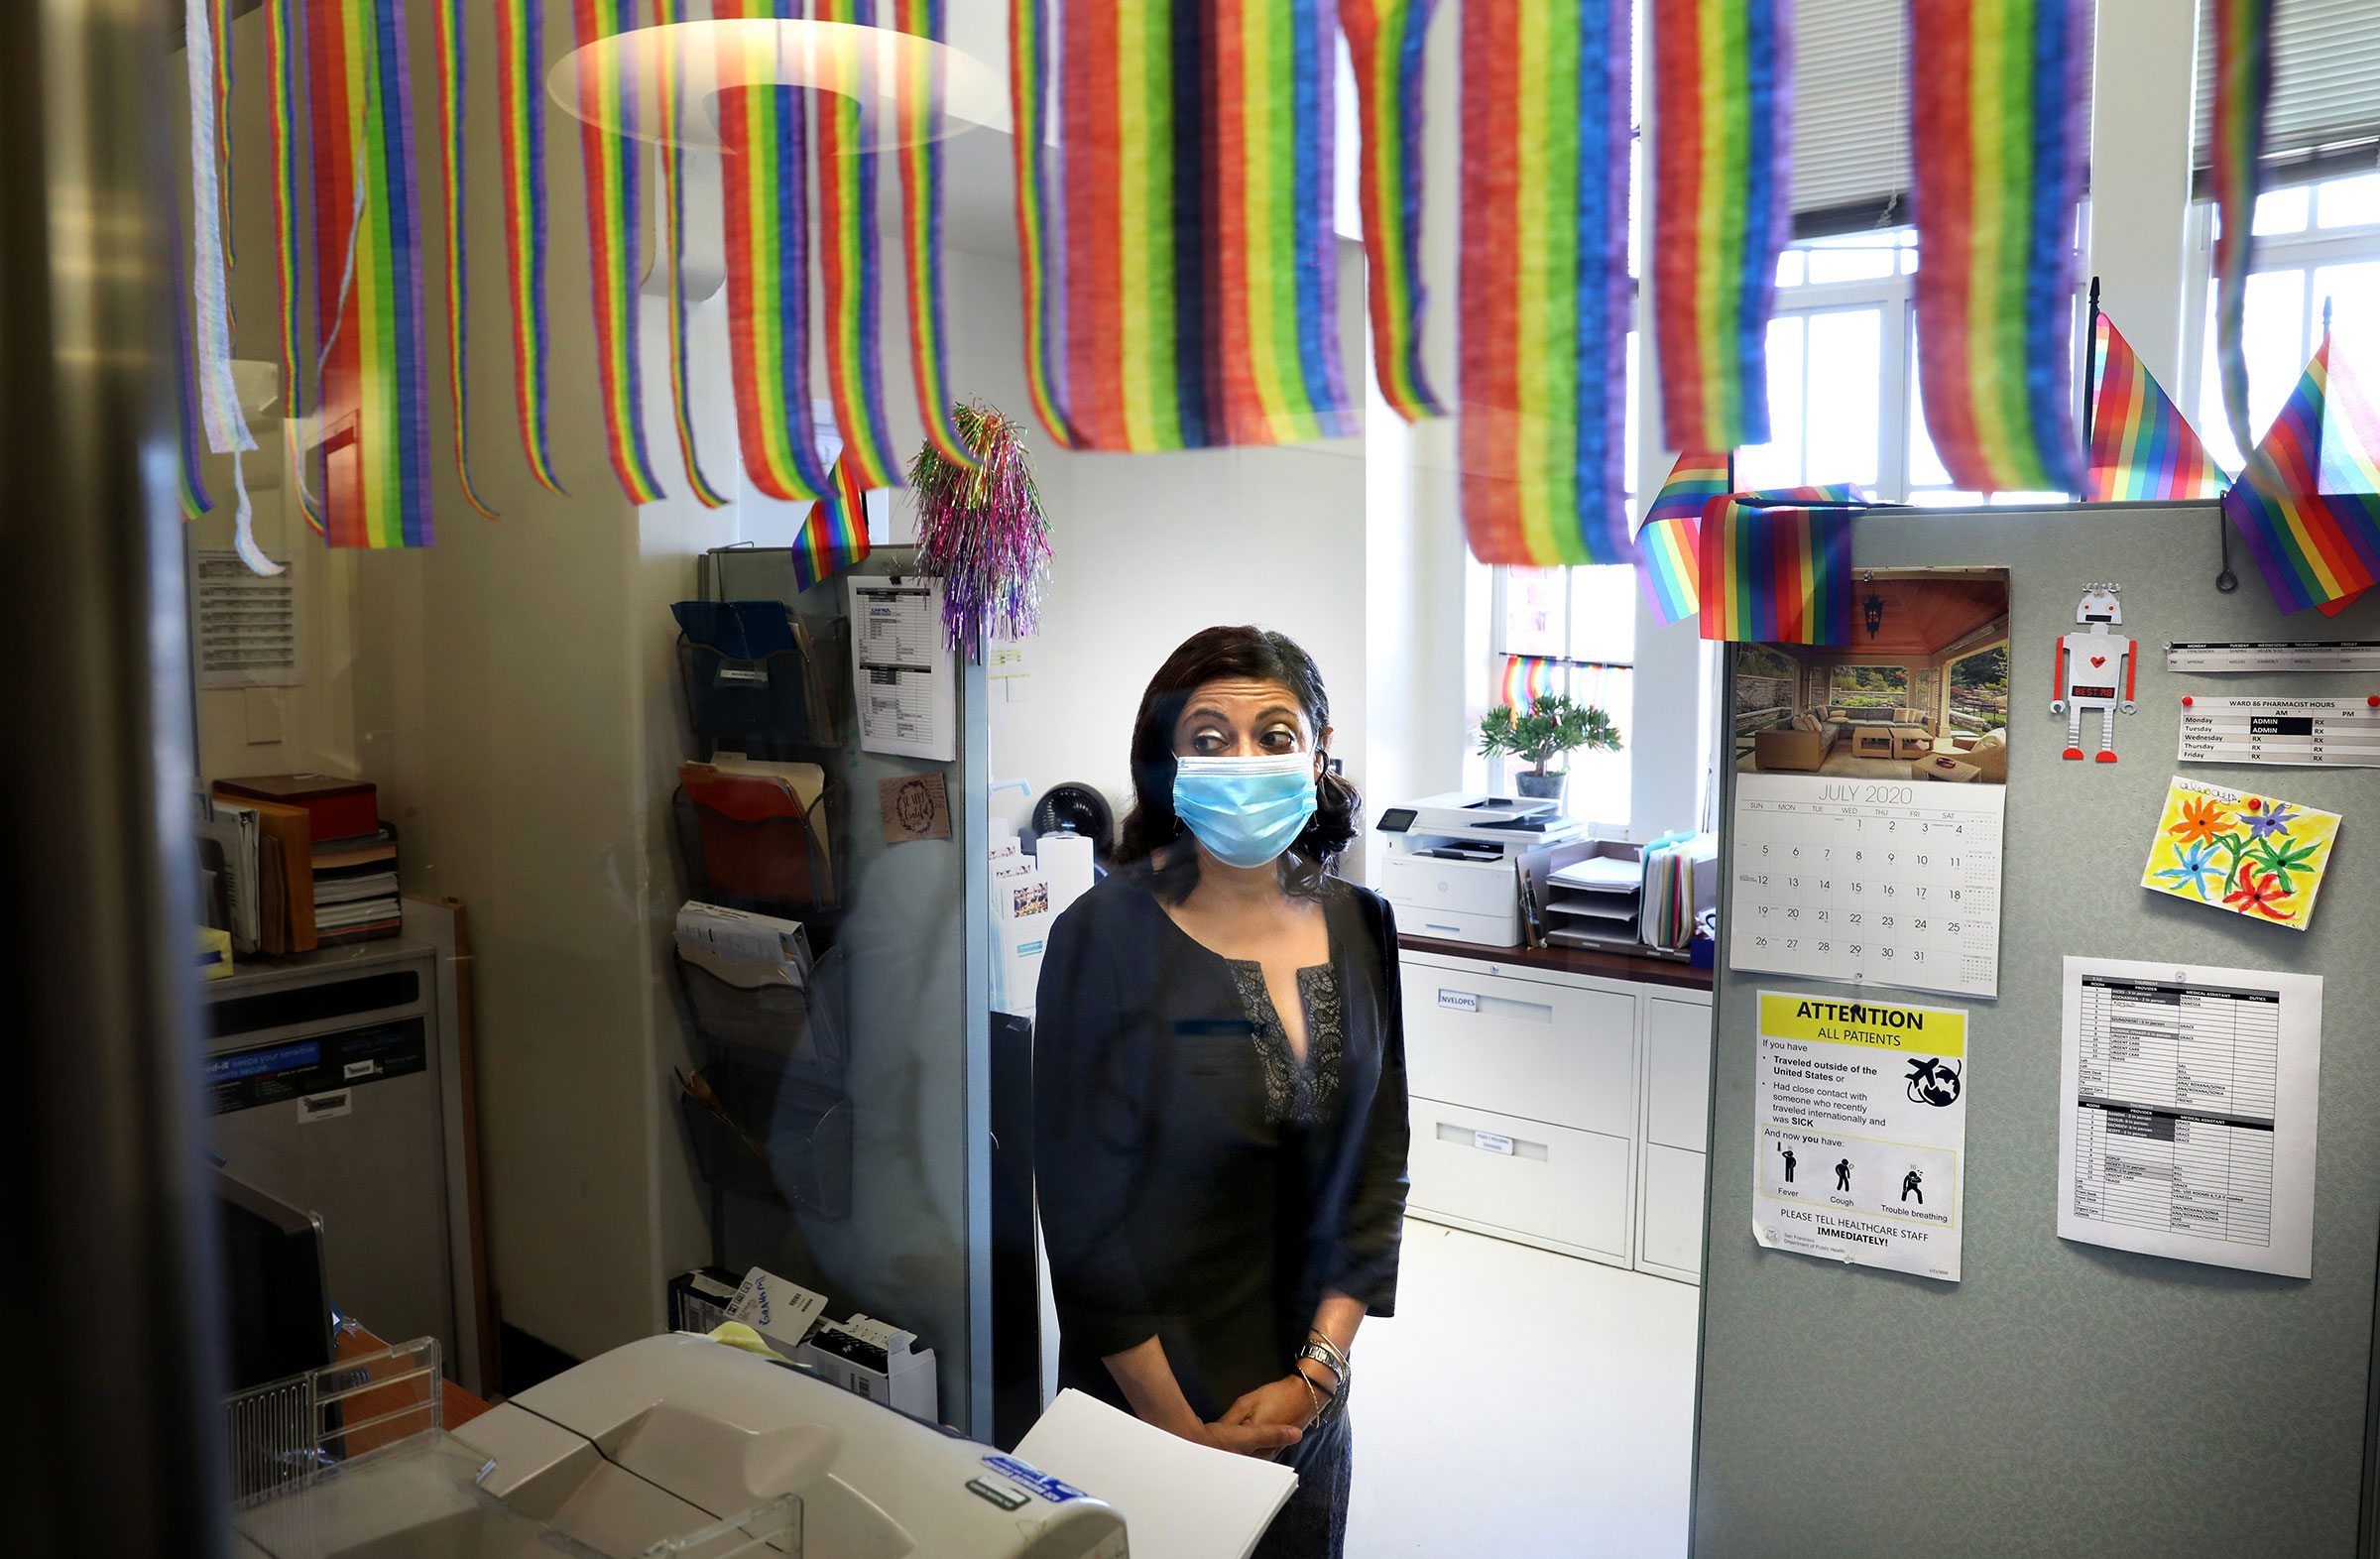 Medical director of Ward 86 at San Francisco General, Monica Gandhi, watches as patients get off the elevator, on July 2, 2020. (Liz Hafalia—The San Francisco Chronicle/Getty Images)